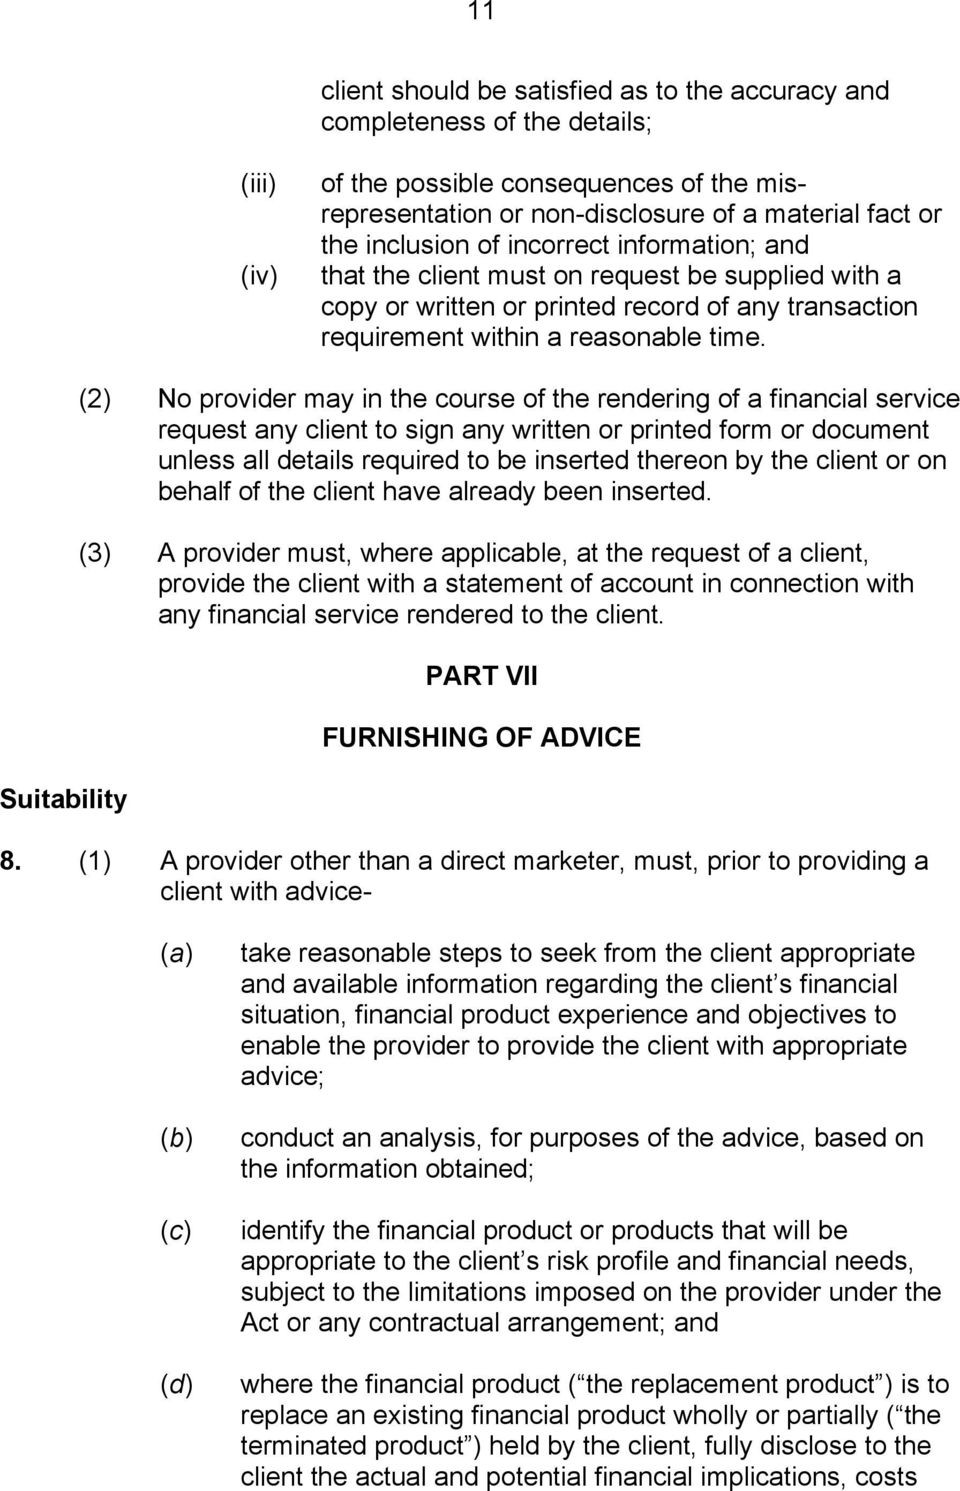 Suitability (2) No provider may in the course of the rendering of a financial service request any client to sign any written or printed form or document unless all details required to be inserted